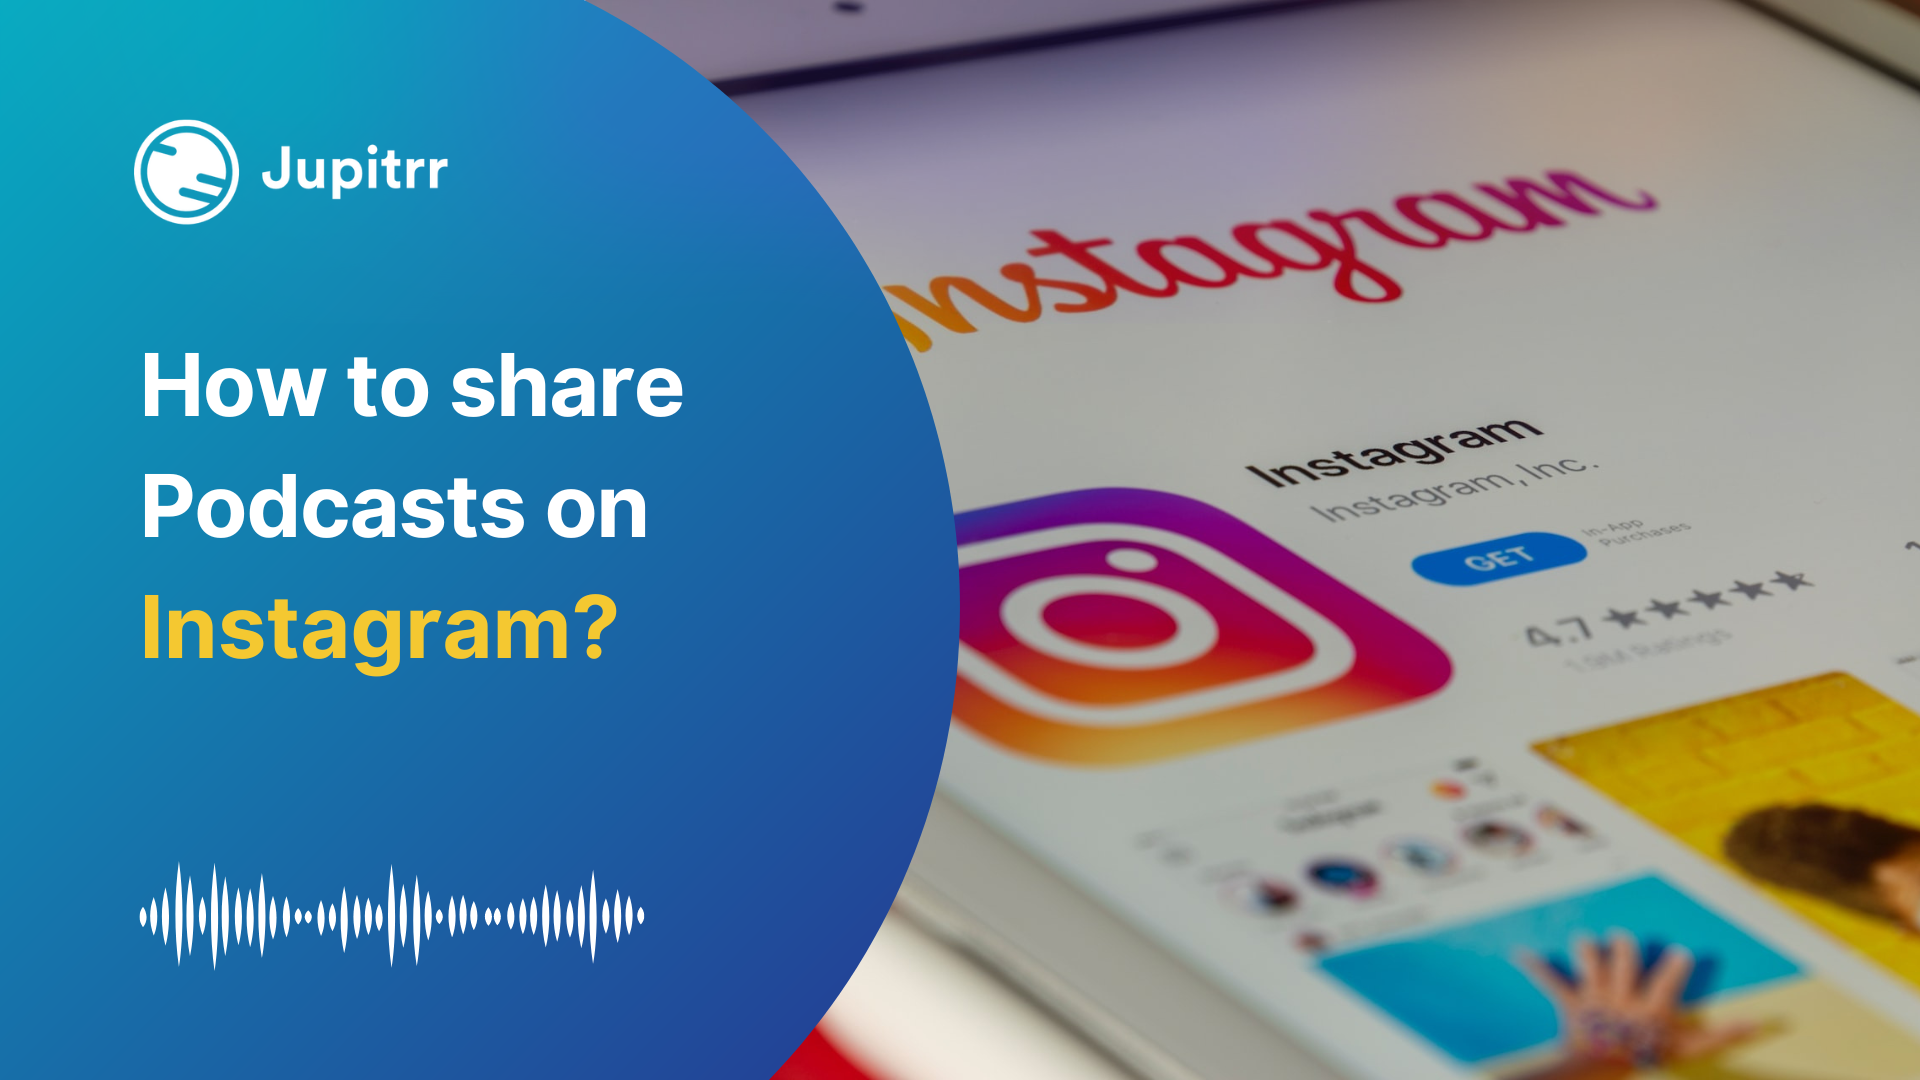 How to share Podcasts on Instagram Posts / Stories?